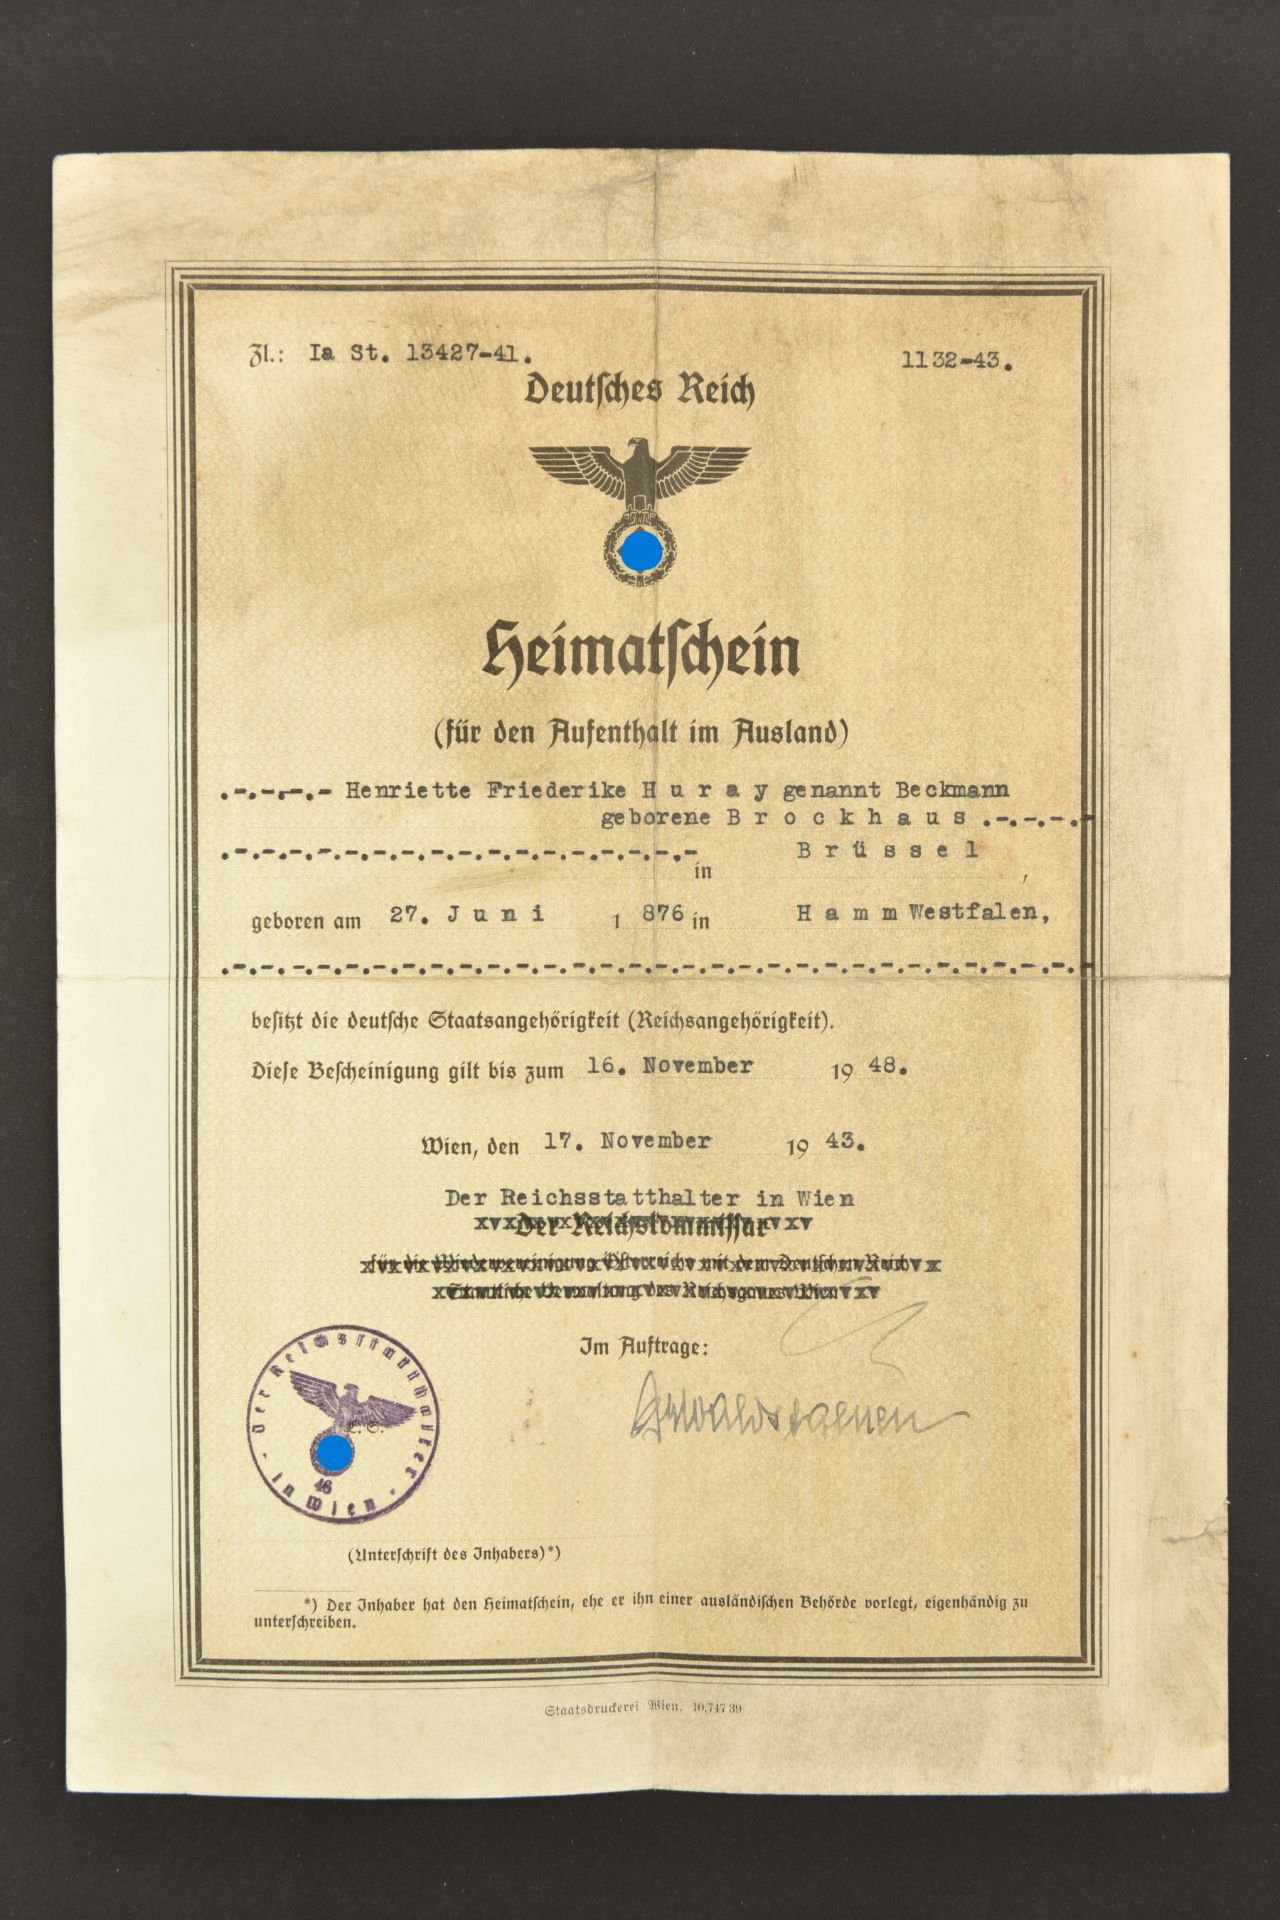 Documents allemand. German Documents. - Image 5 of 6